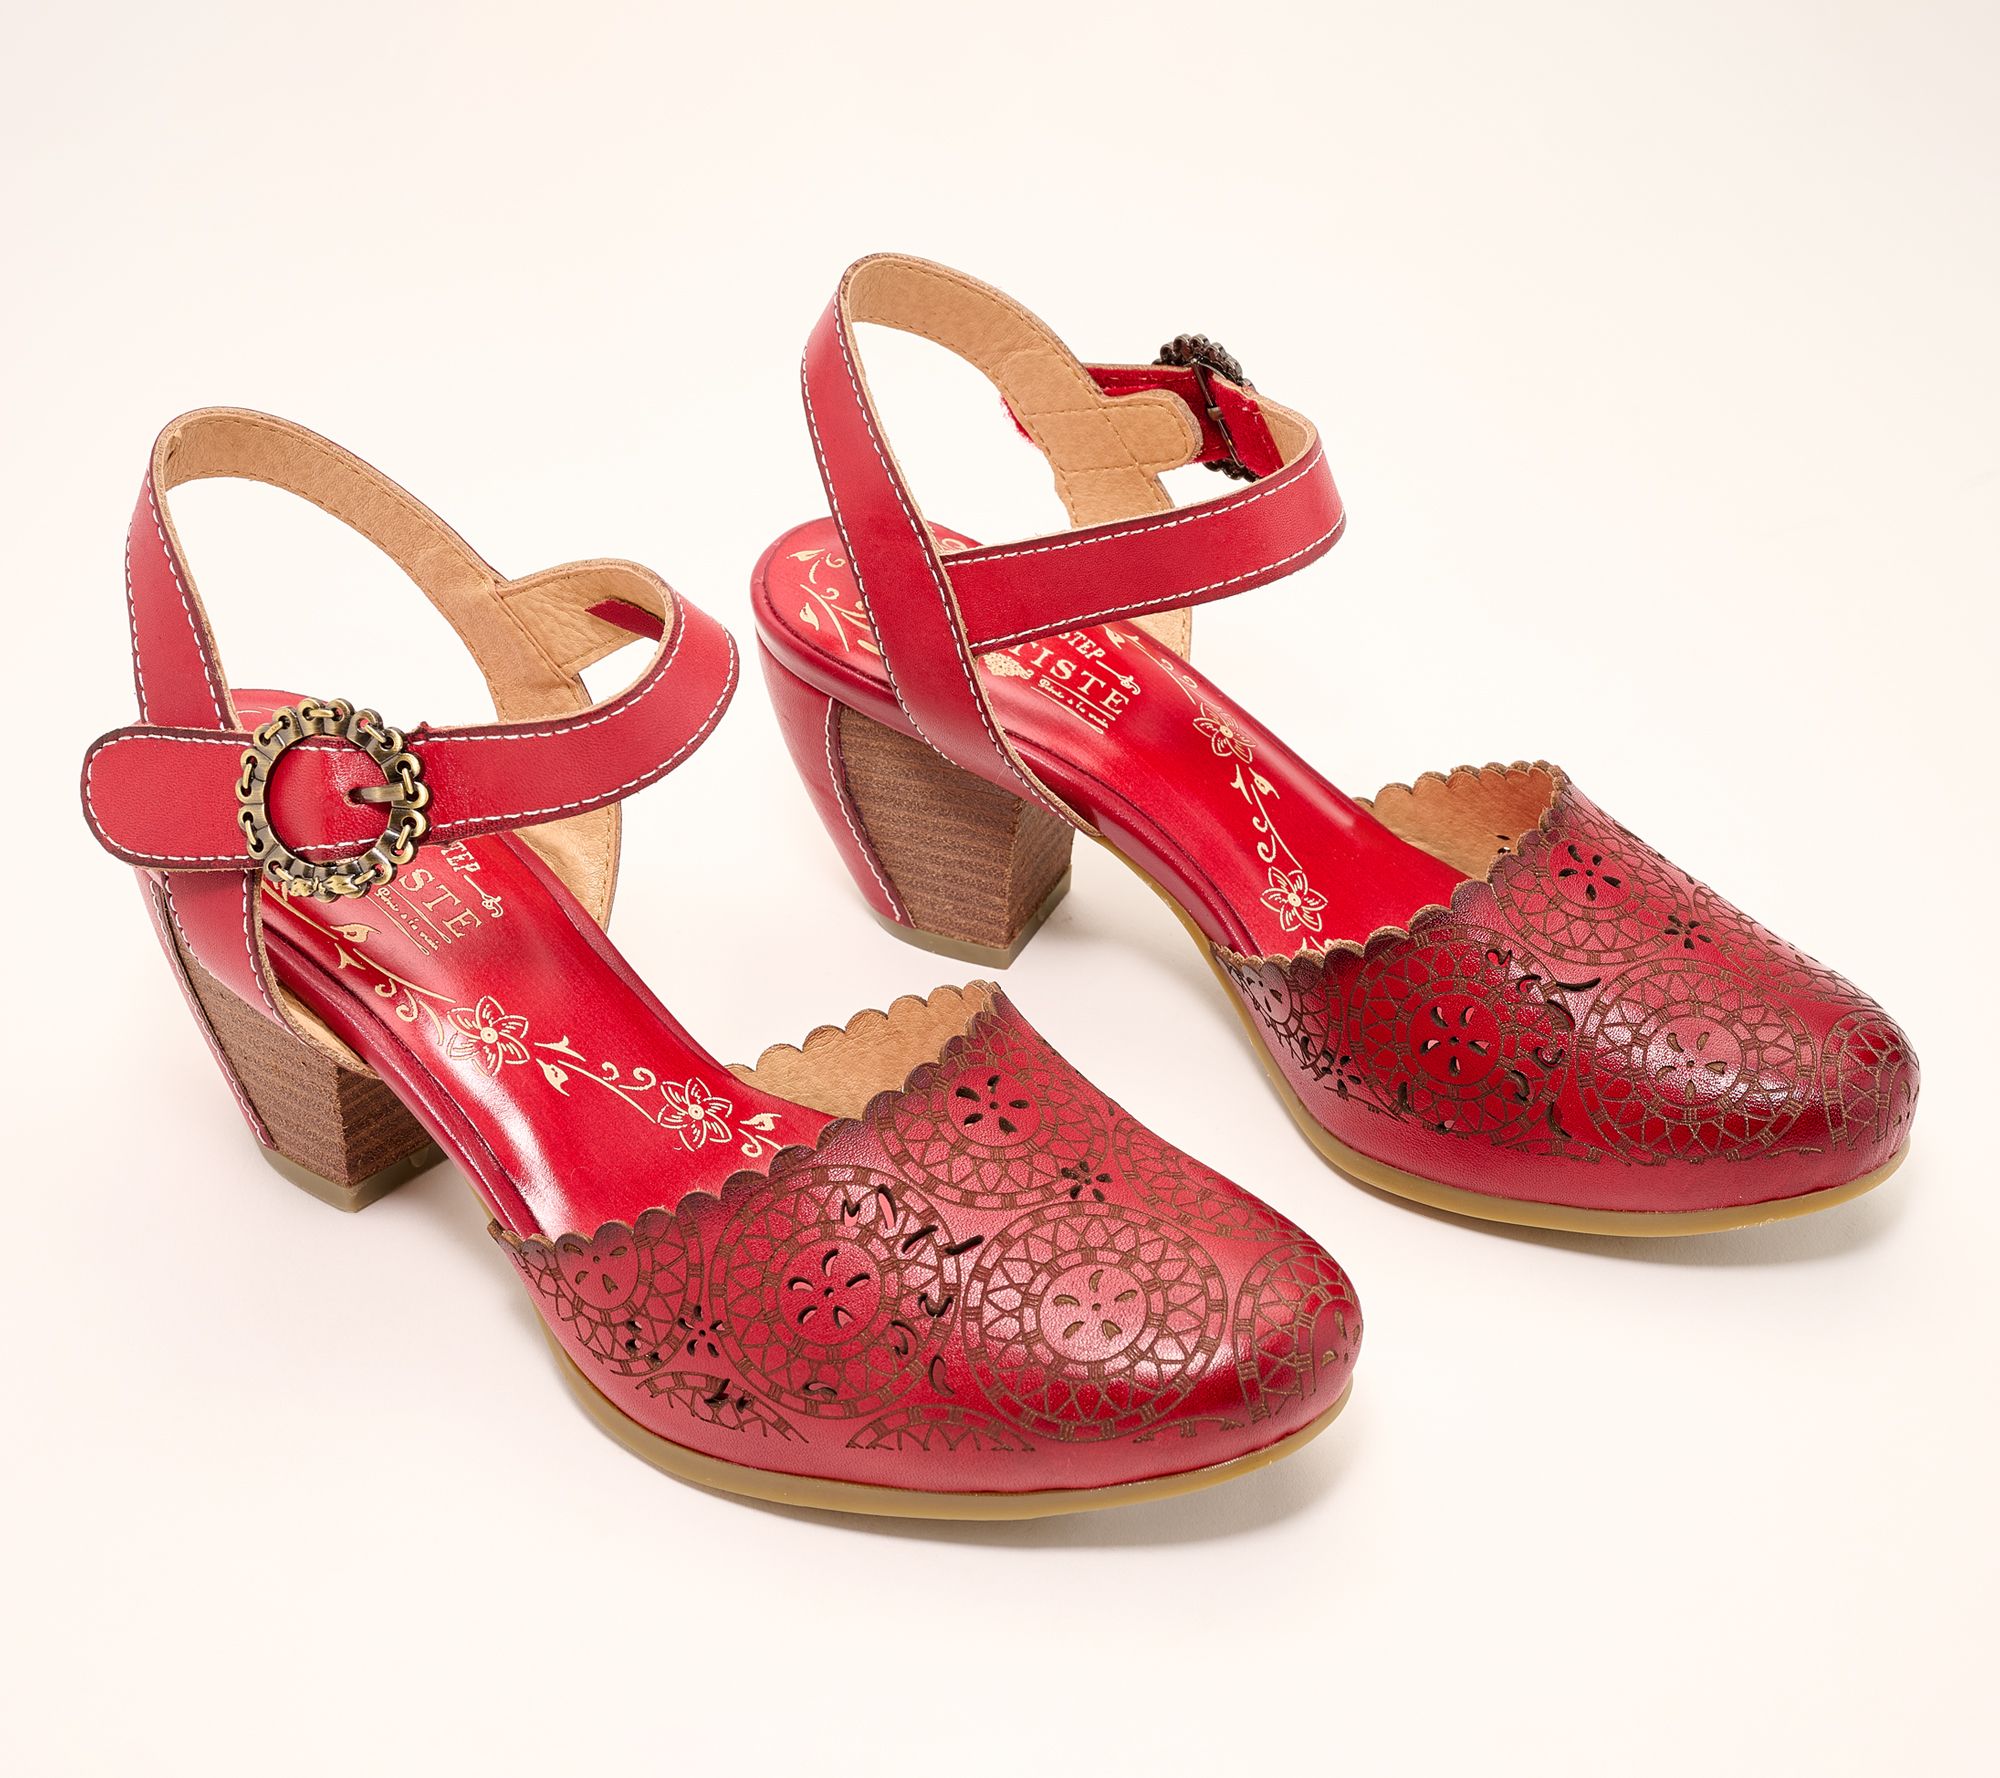 L'Artiste by Spring Step Leather Heeled Mary Janes - Eiloota - QVC.com